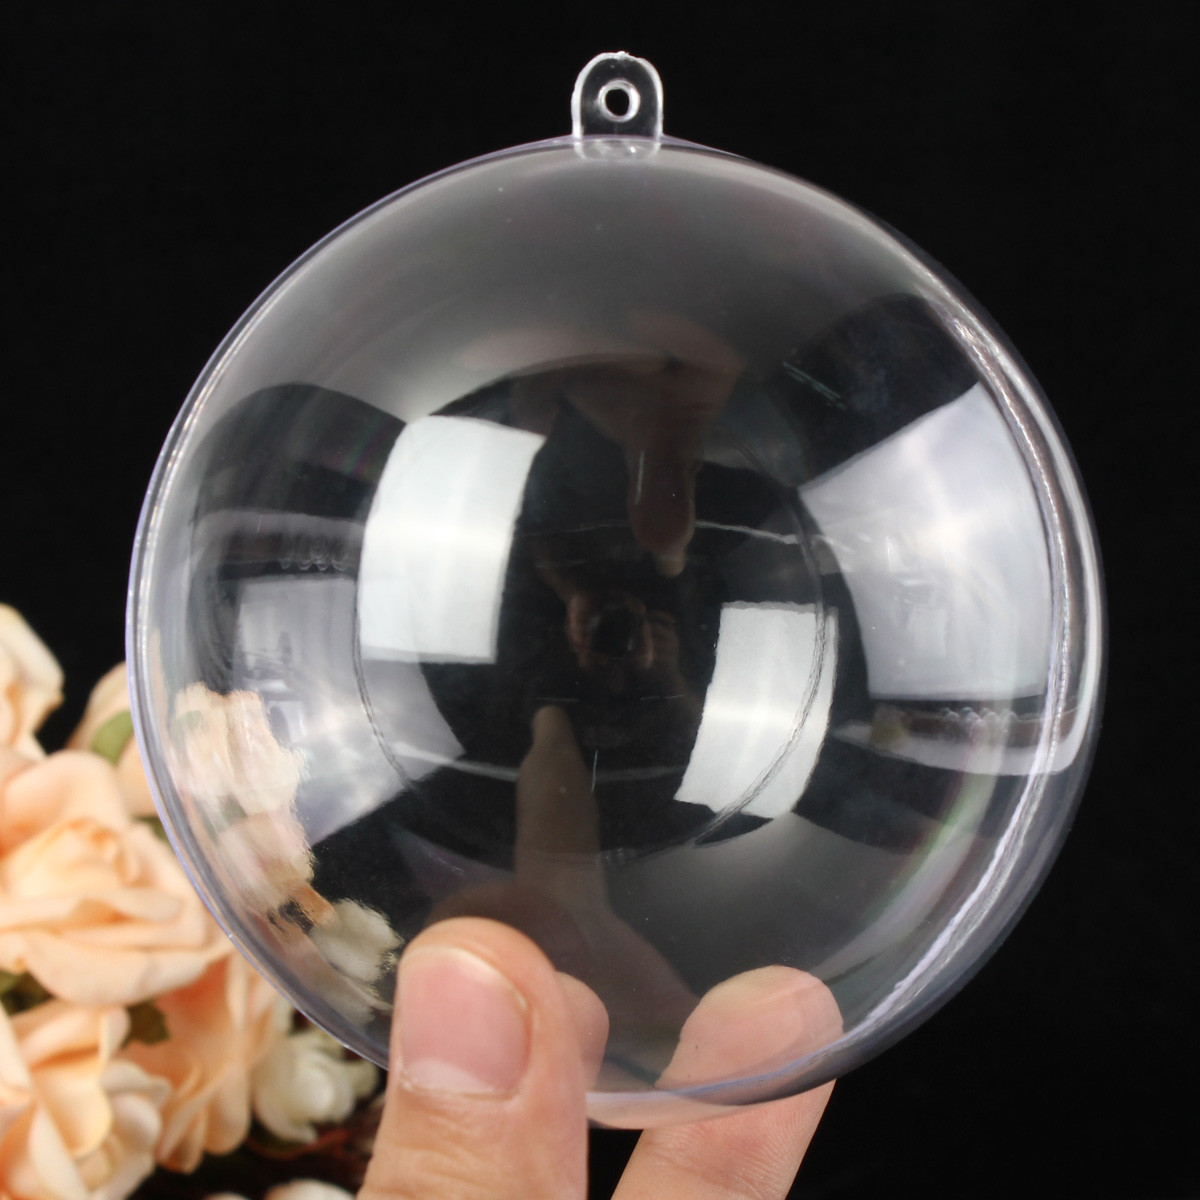 5pcs Christmas Tree Decoration Clear Hanging Ball Gift Candy Hanging Decration Ball